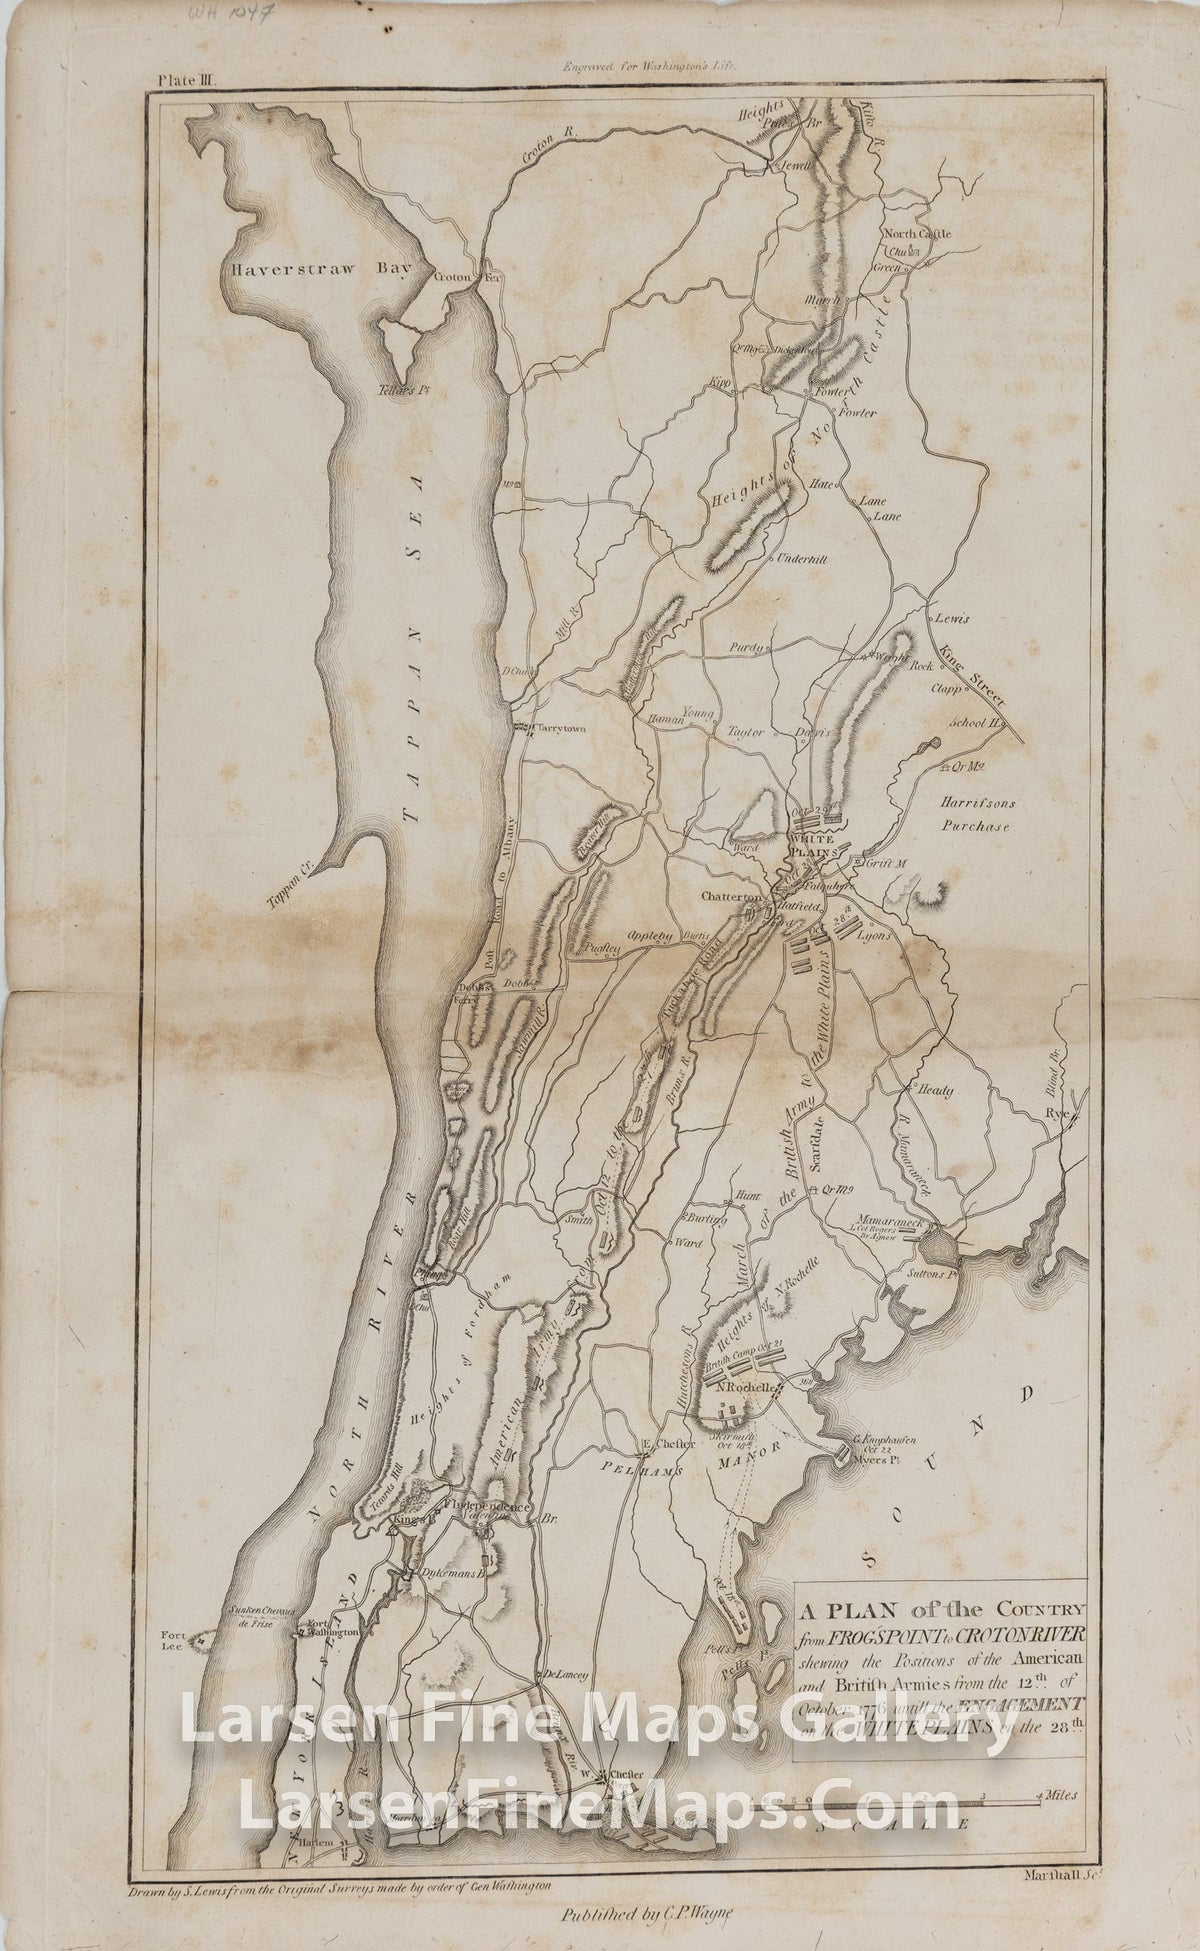 A PLAN of the Country from FROG'S POINT to CROTON RIVER showing the Postions of the American and British Armies from the 12th of October 1776 untill the ENGAGEMENT on the WHITE PLAINS on the 28th